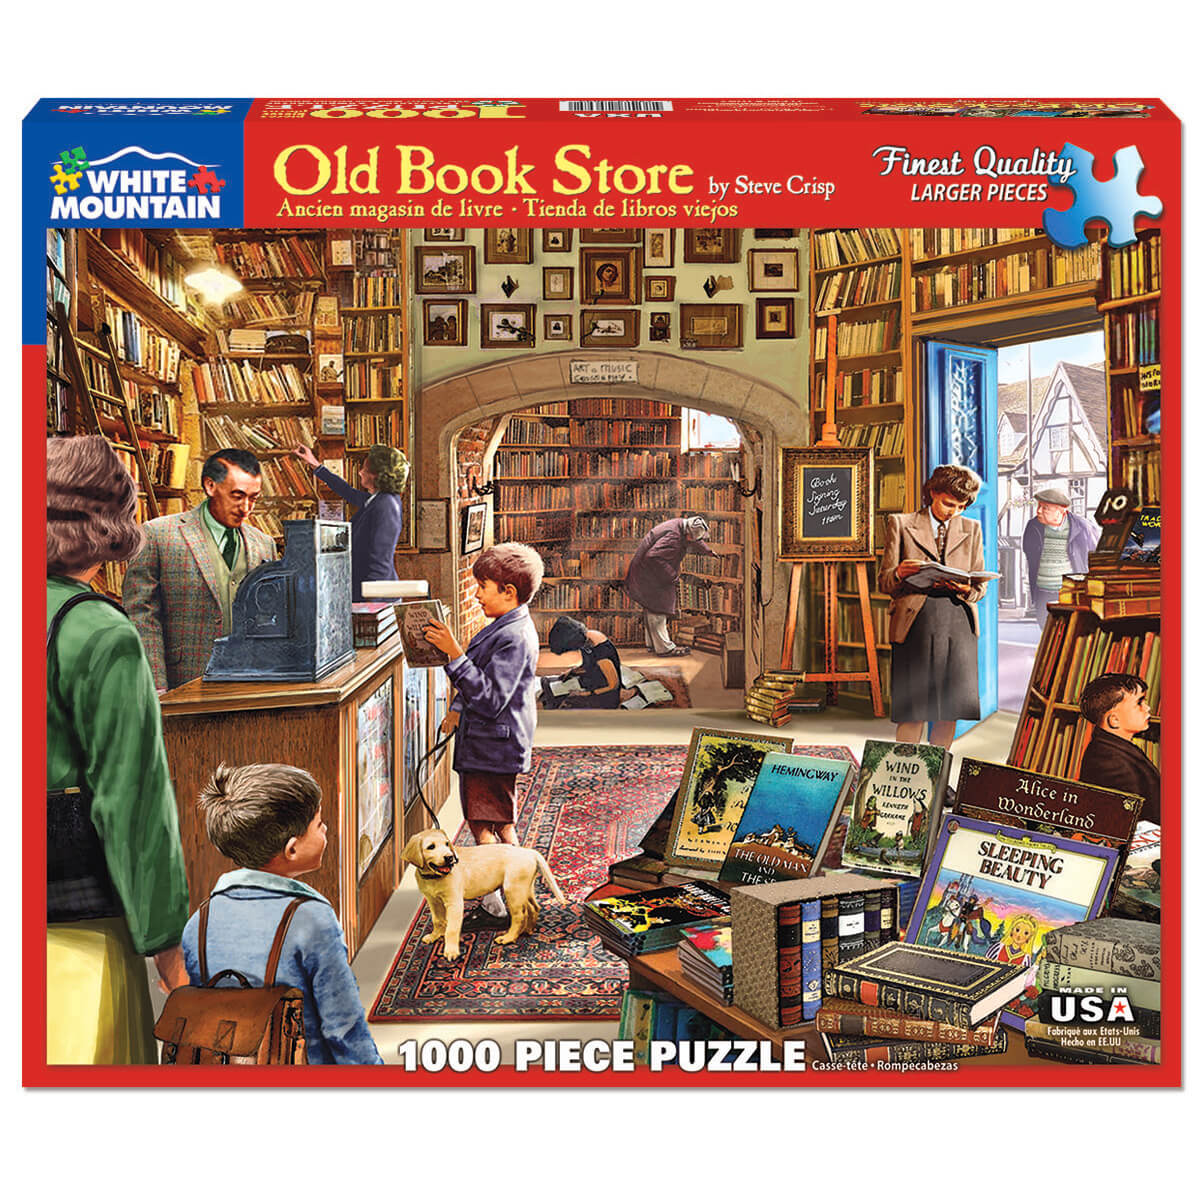 White Mountain Puzzles Old Book Store 1000 Piece Jigsaw Puzzle